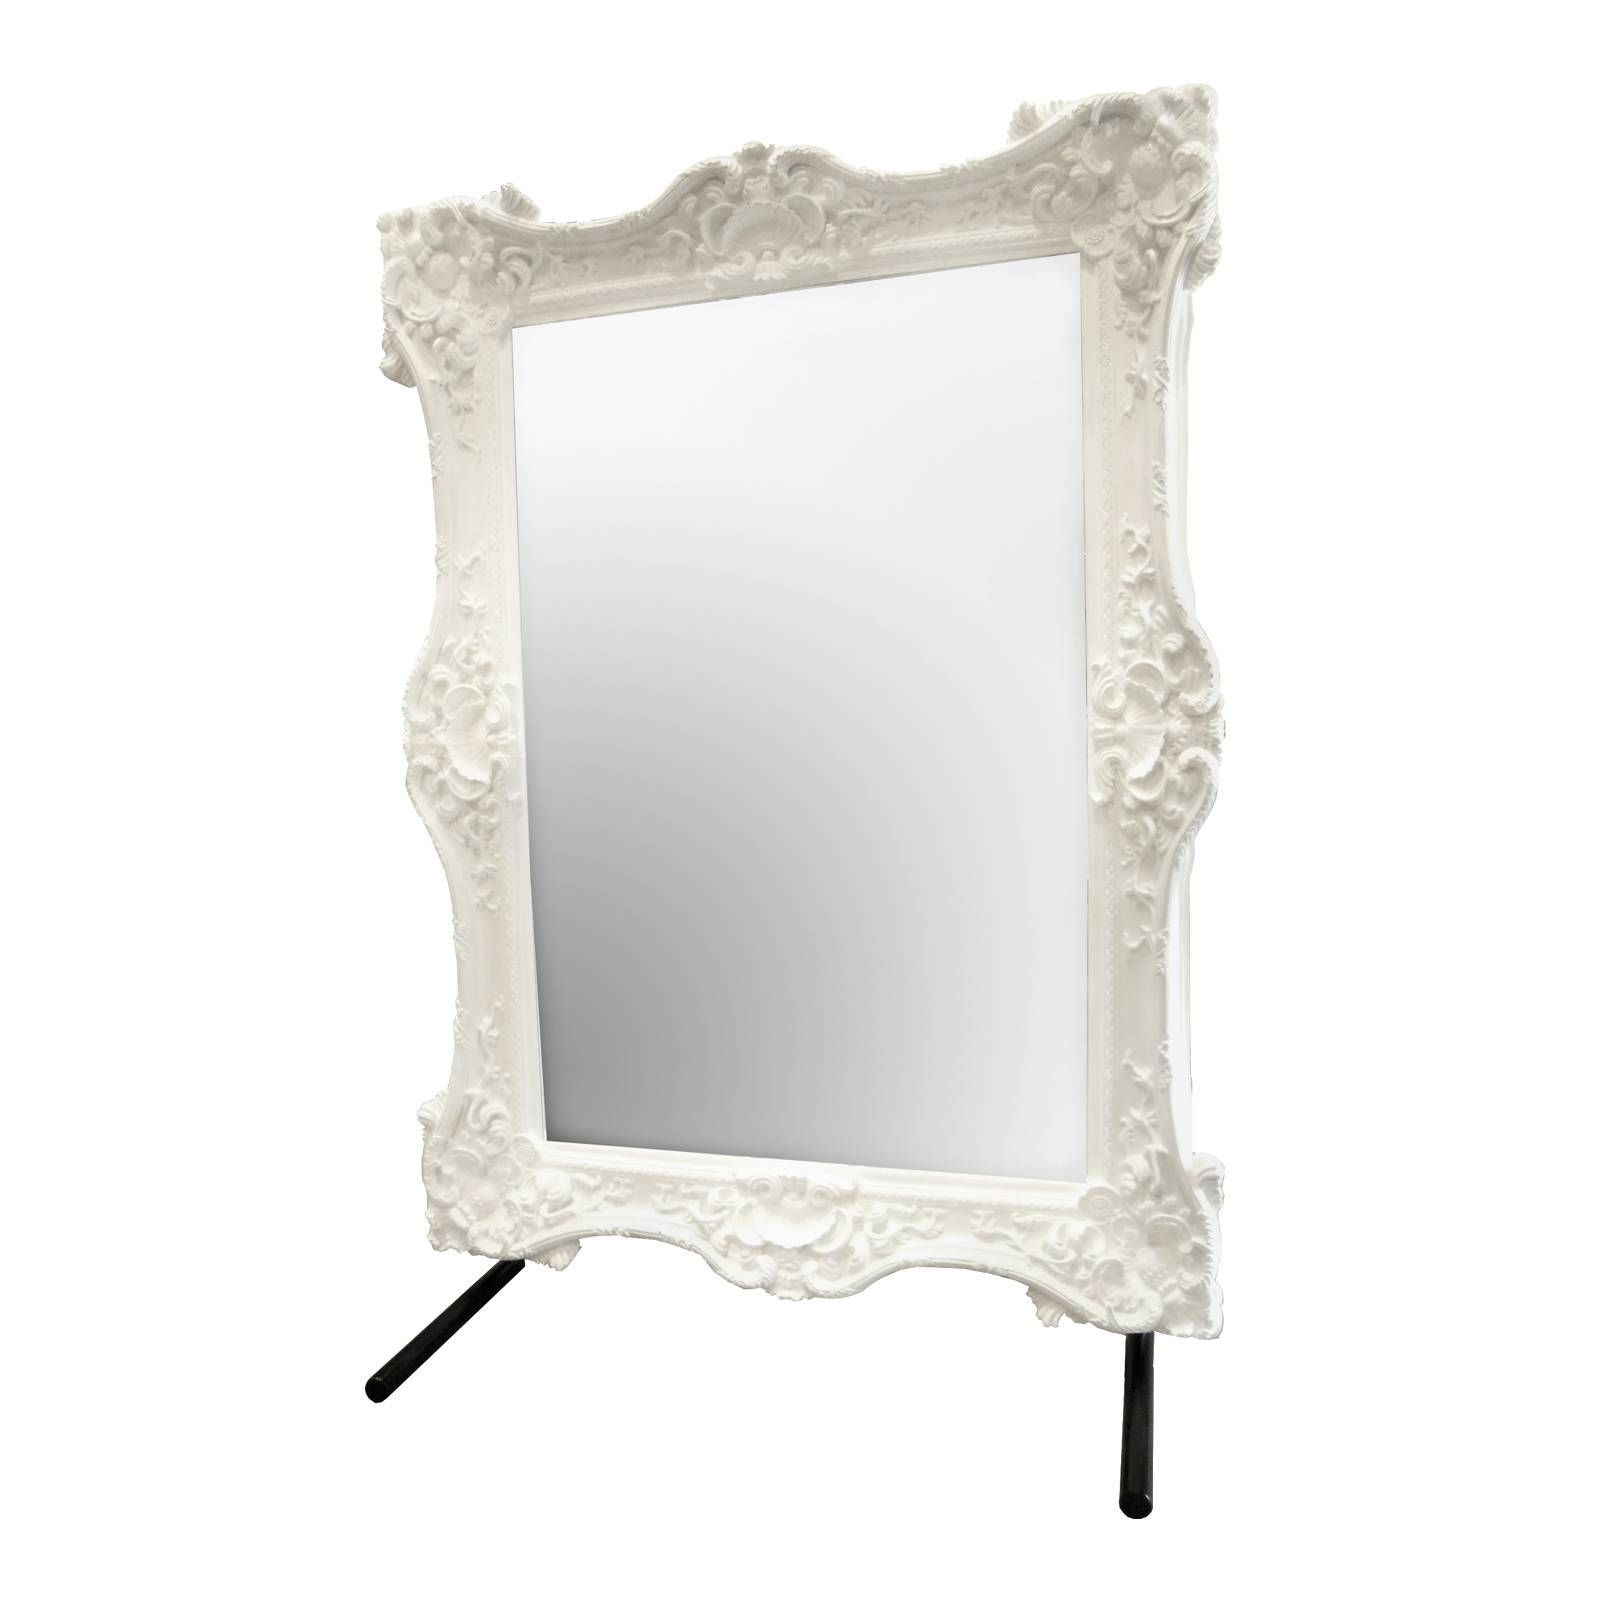 Bathroom: Astounding Baroque Mirror With Unique Frame For Bathroom Inside White Baroque Wall Mirrors (View 25 of 25)